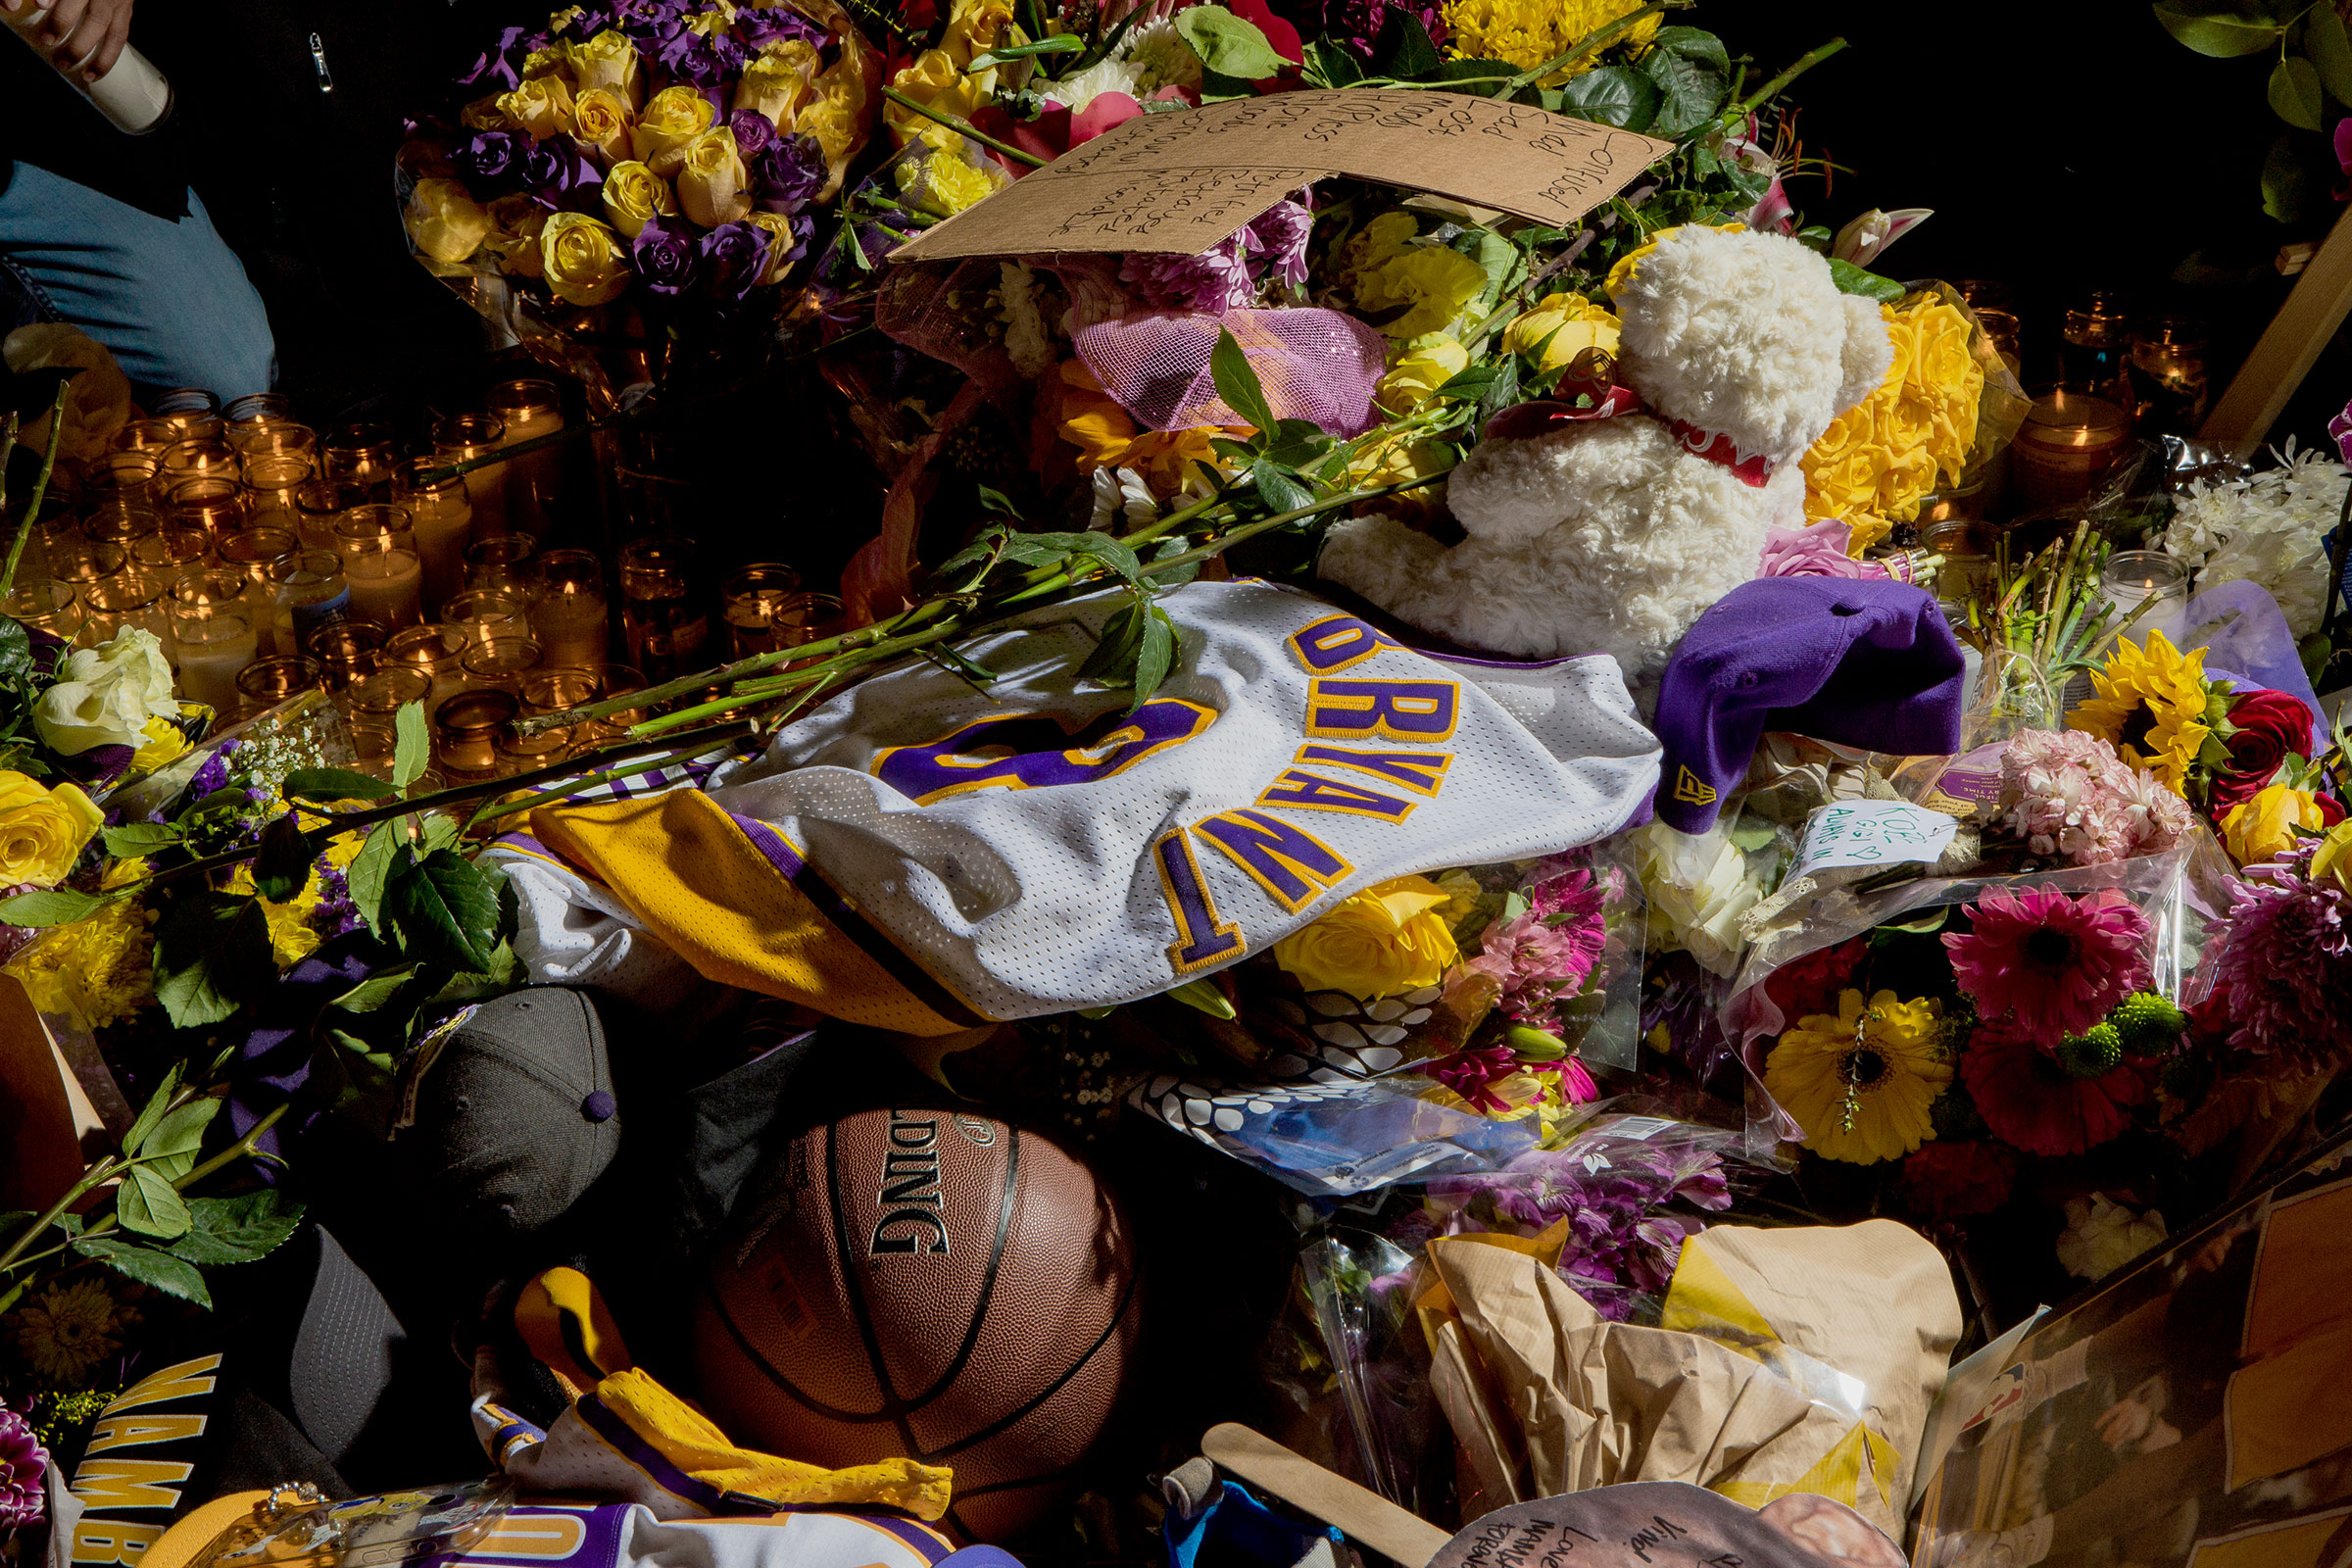 Hundreds of fans gathered near Staples Center in Los Angeles on Sunday to mourn the death of Kobe Bryant, who died in a helicopter crash in Calabasas, along with eight others, including his daughter Gianna, 13.